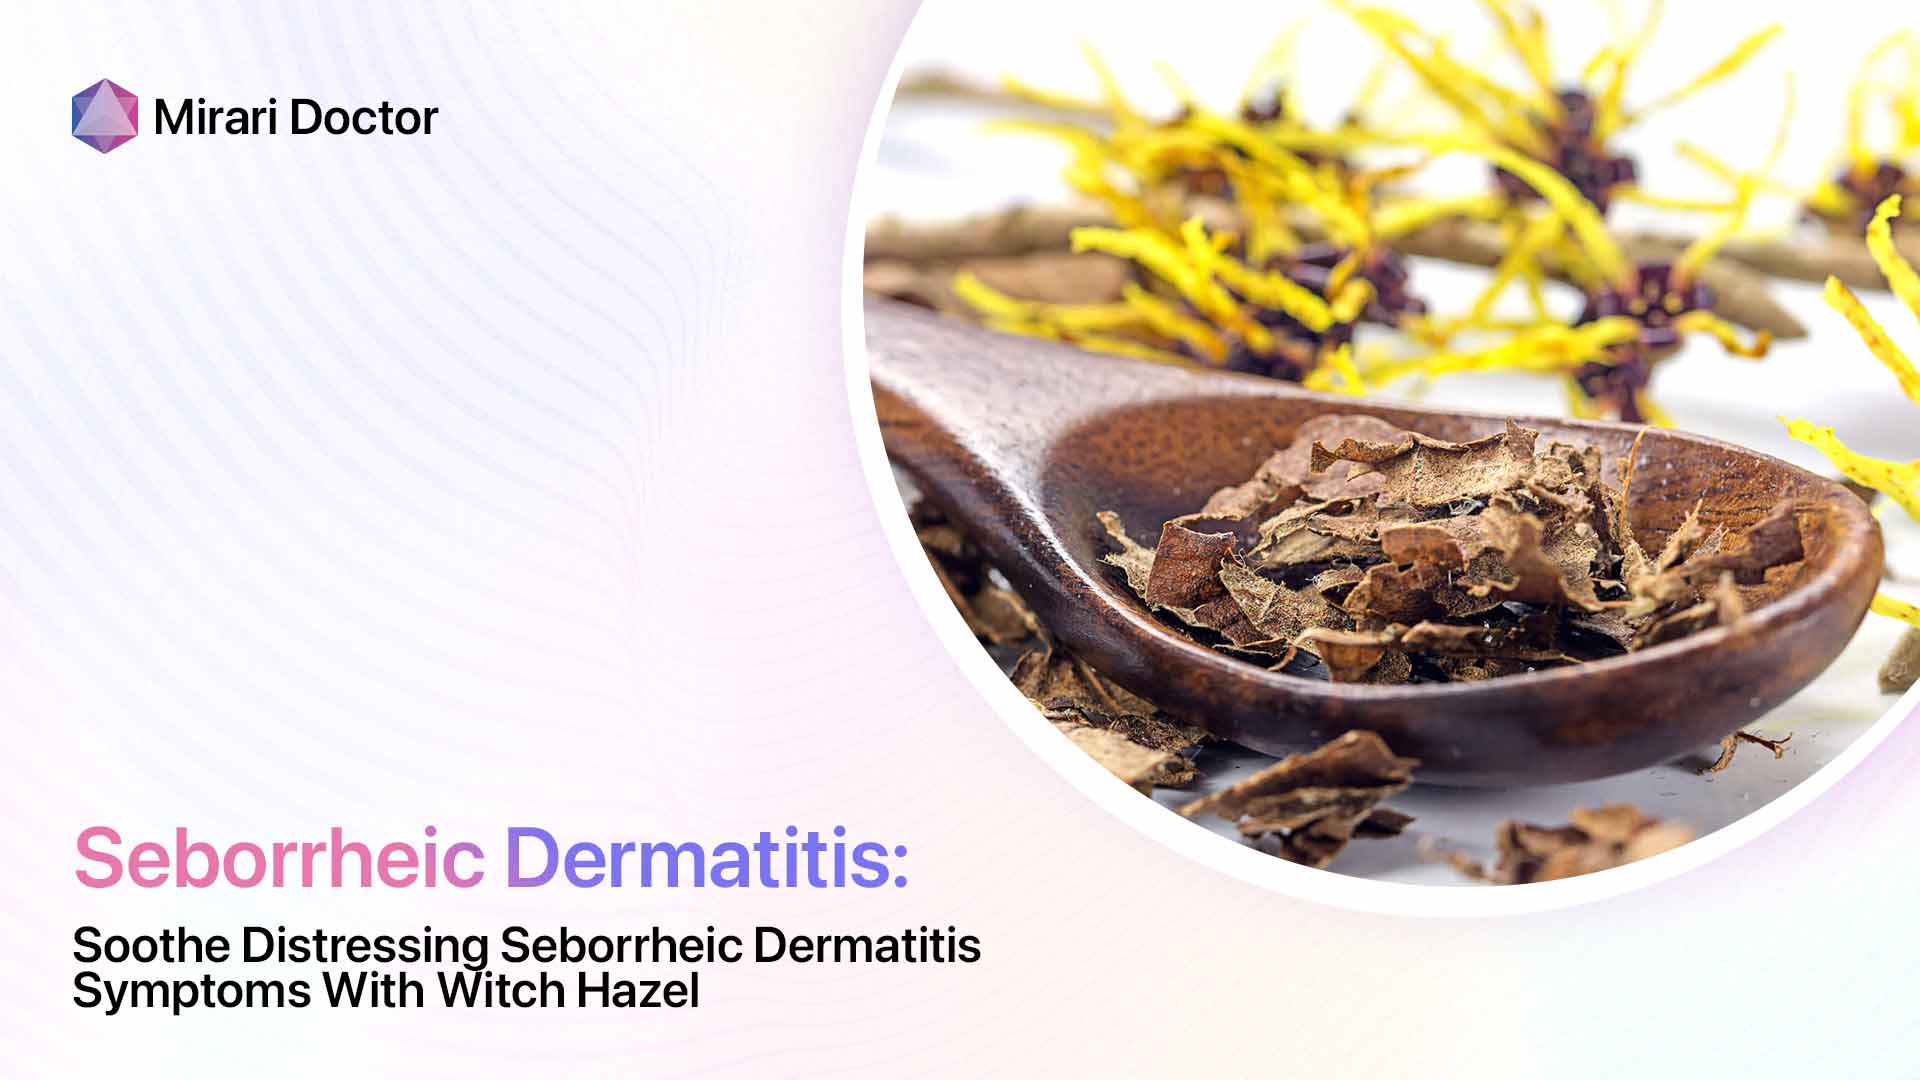 Featured image for “Soothe Distressing Seborrheic Dermatitis Symptoms With Witch Hazel”